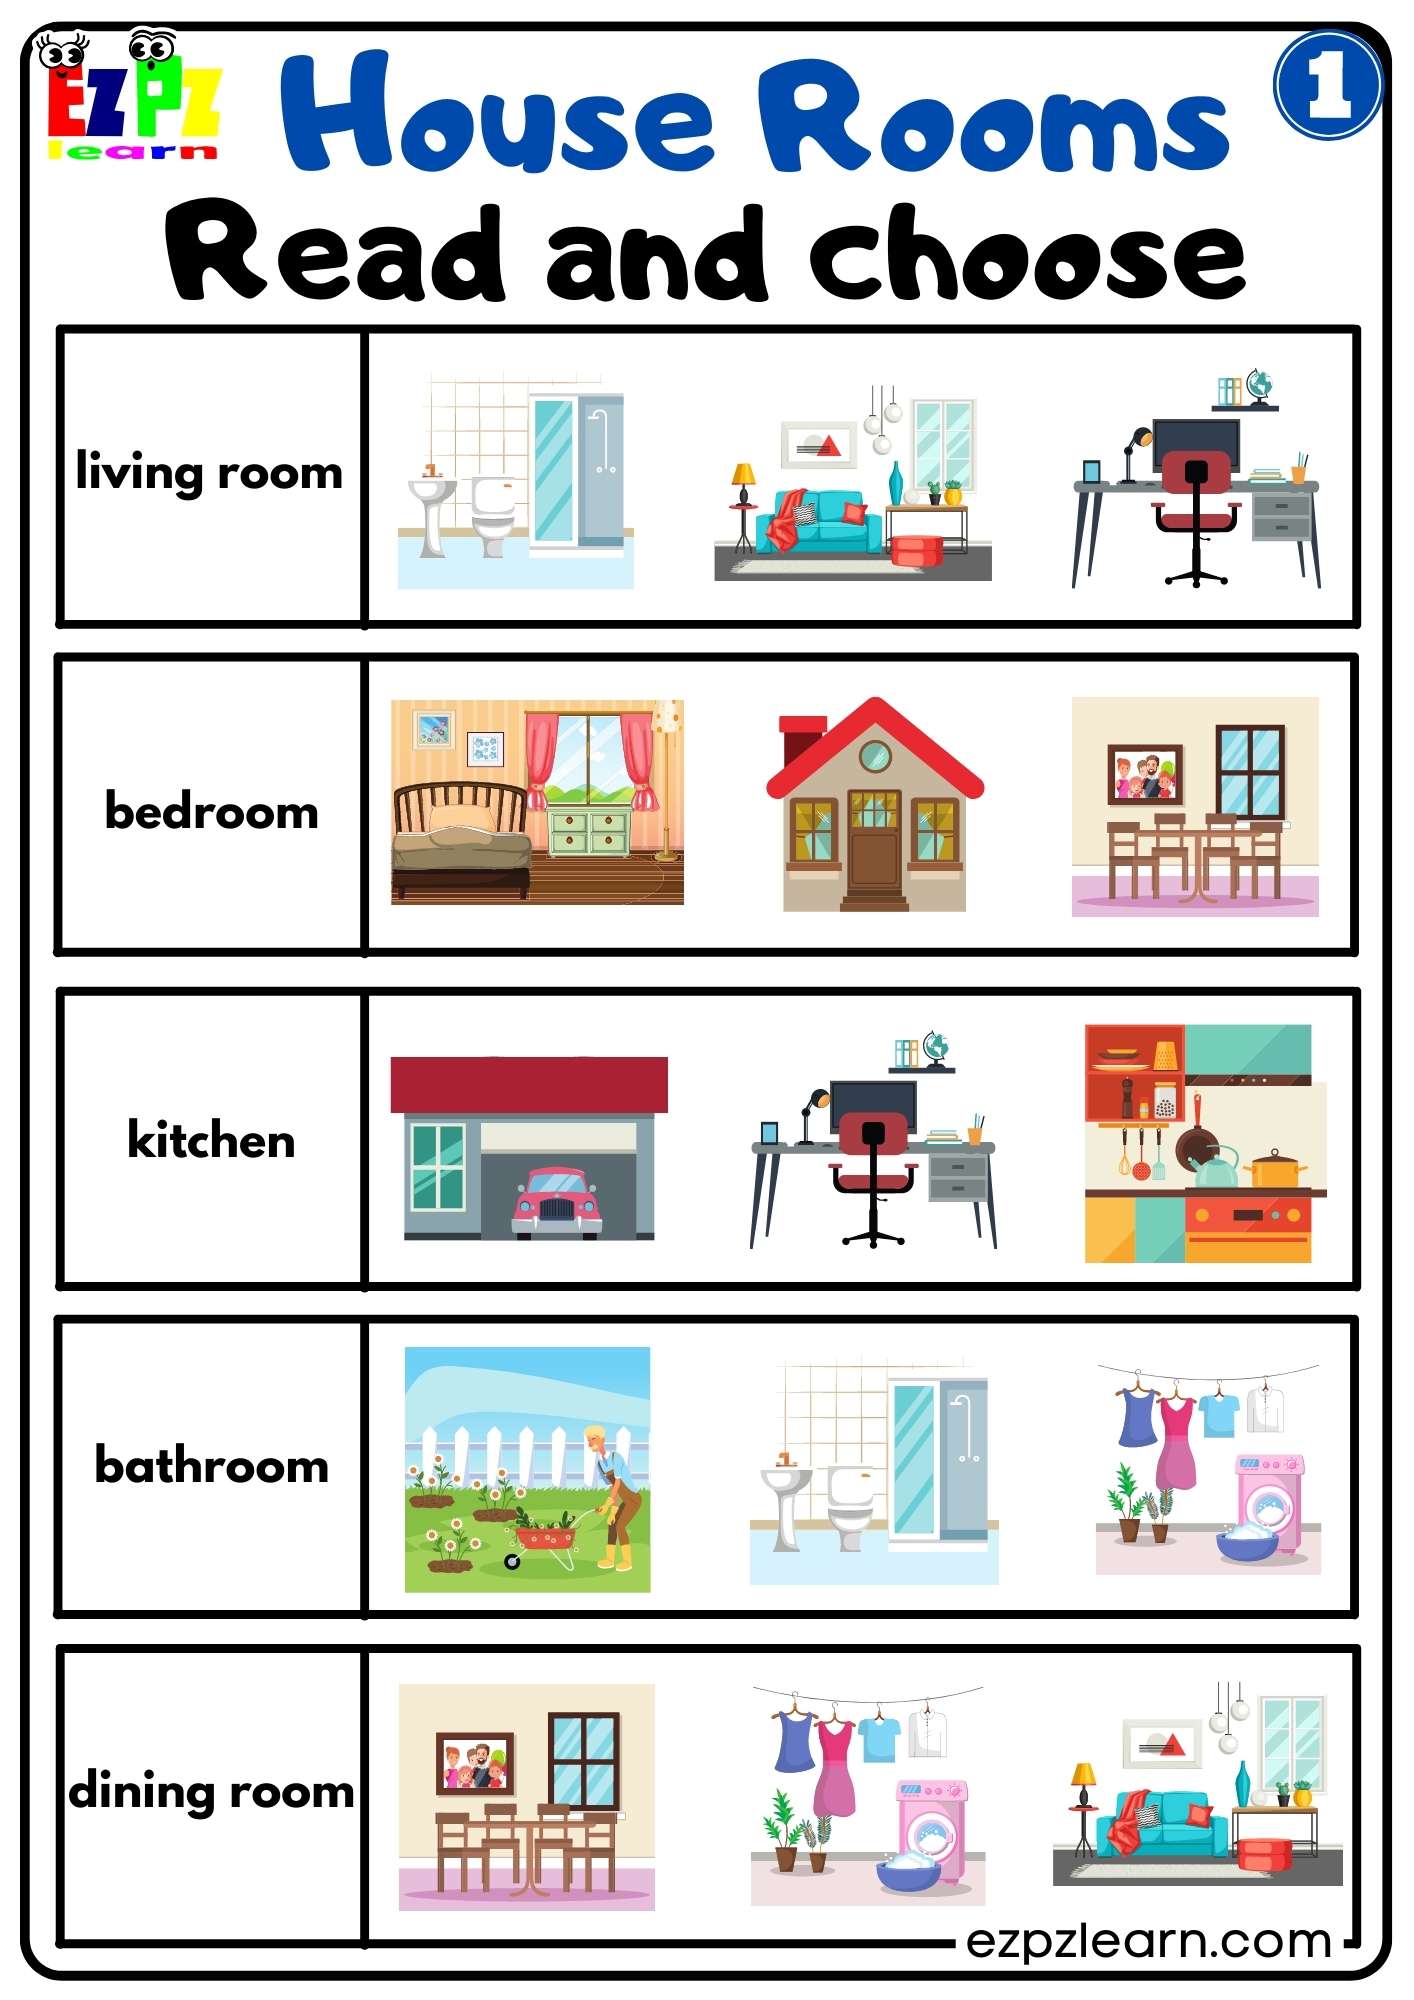 Rooms of the house exercise